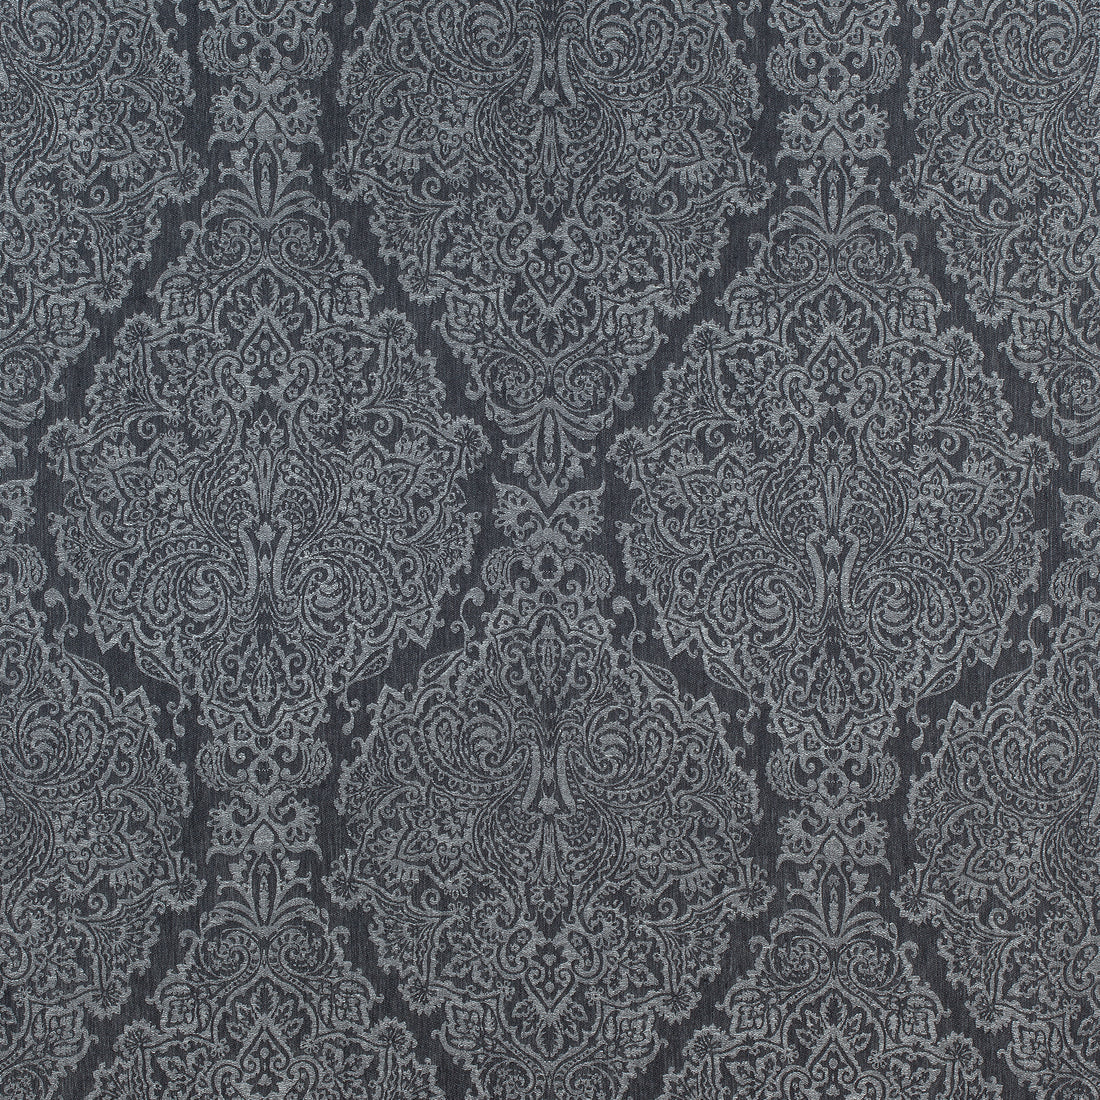 Sterling Paisley fabric in charcoal color - pattern number AW73027 - by Anna French in the Meridian collection